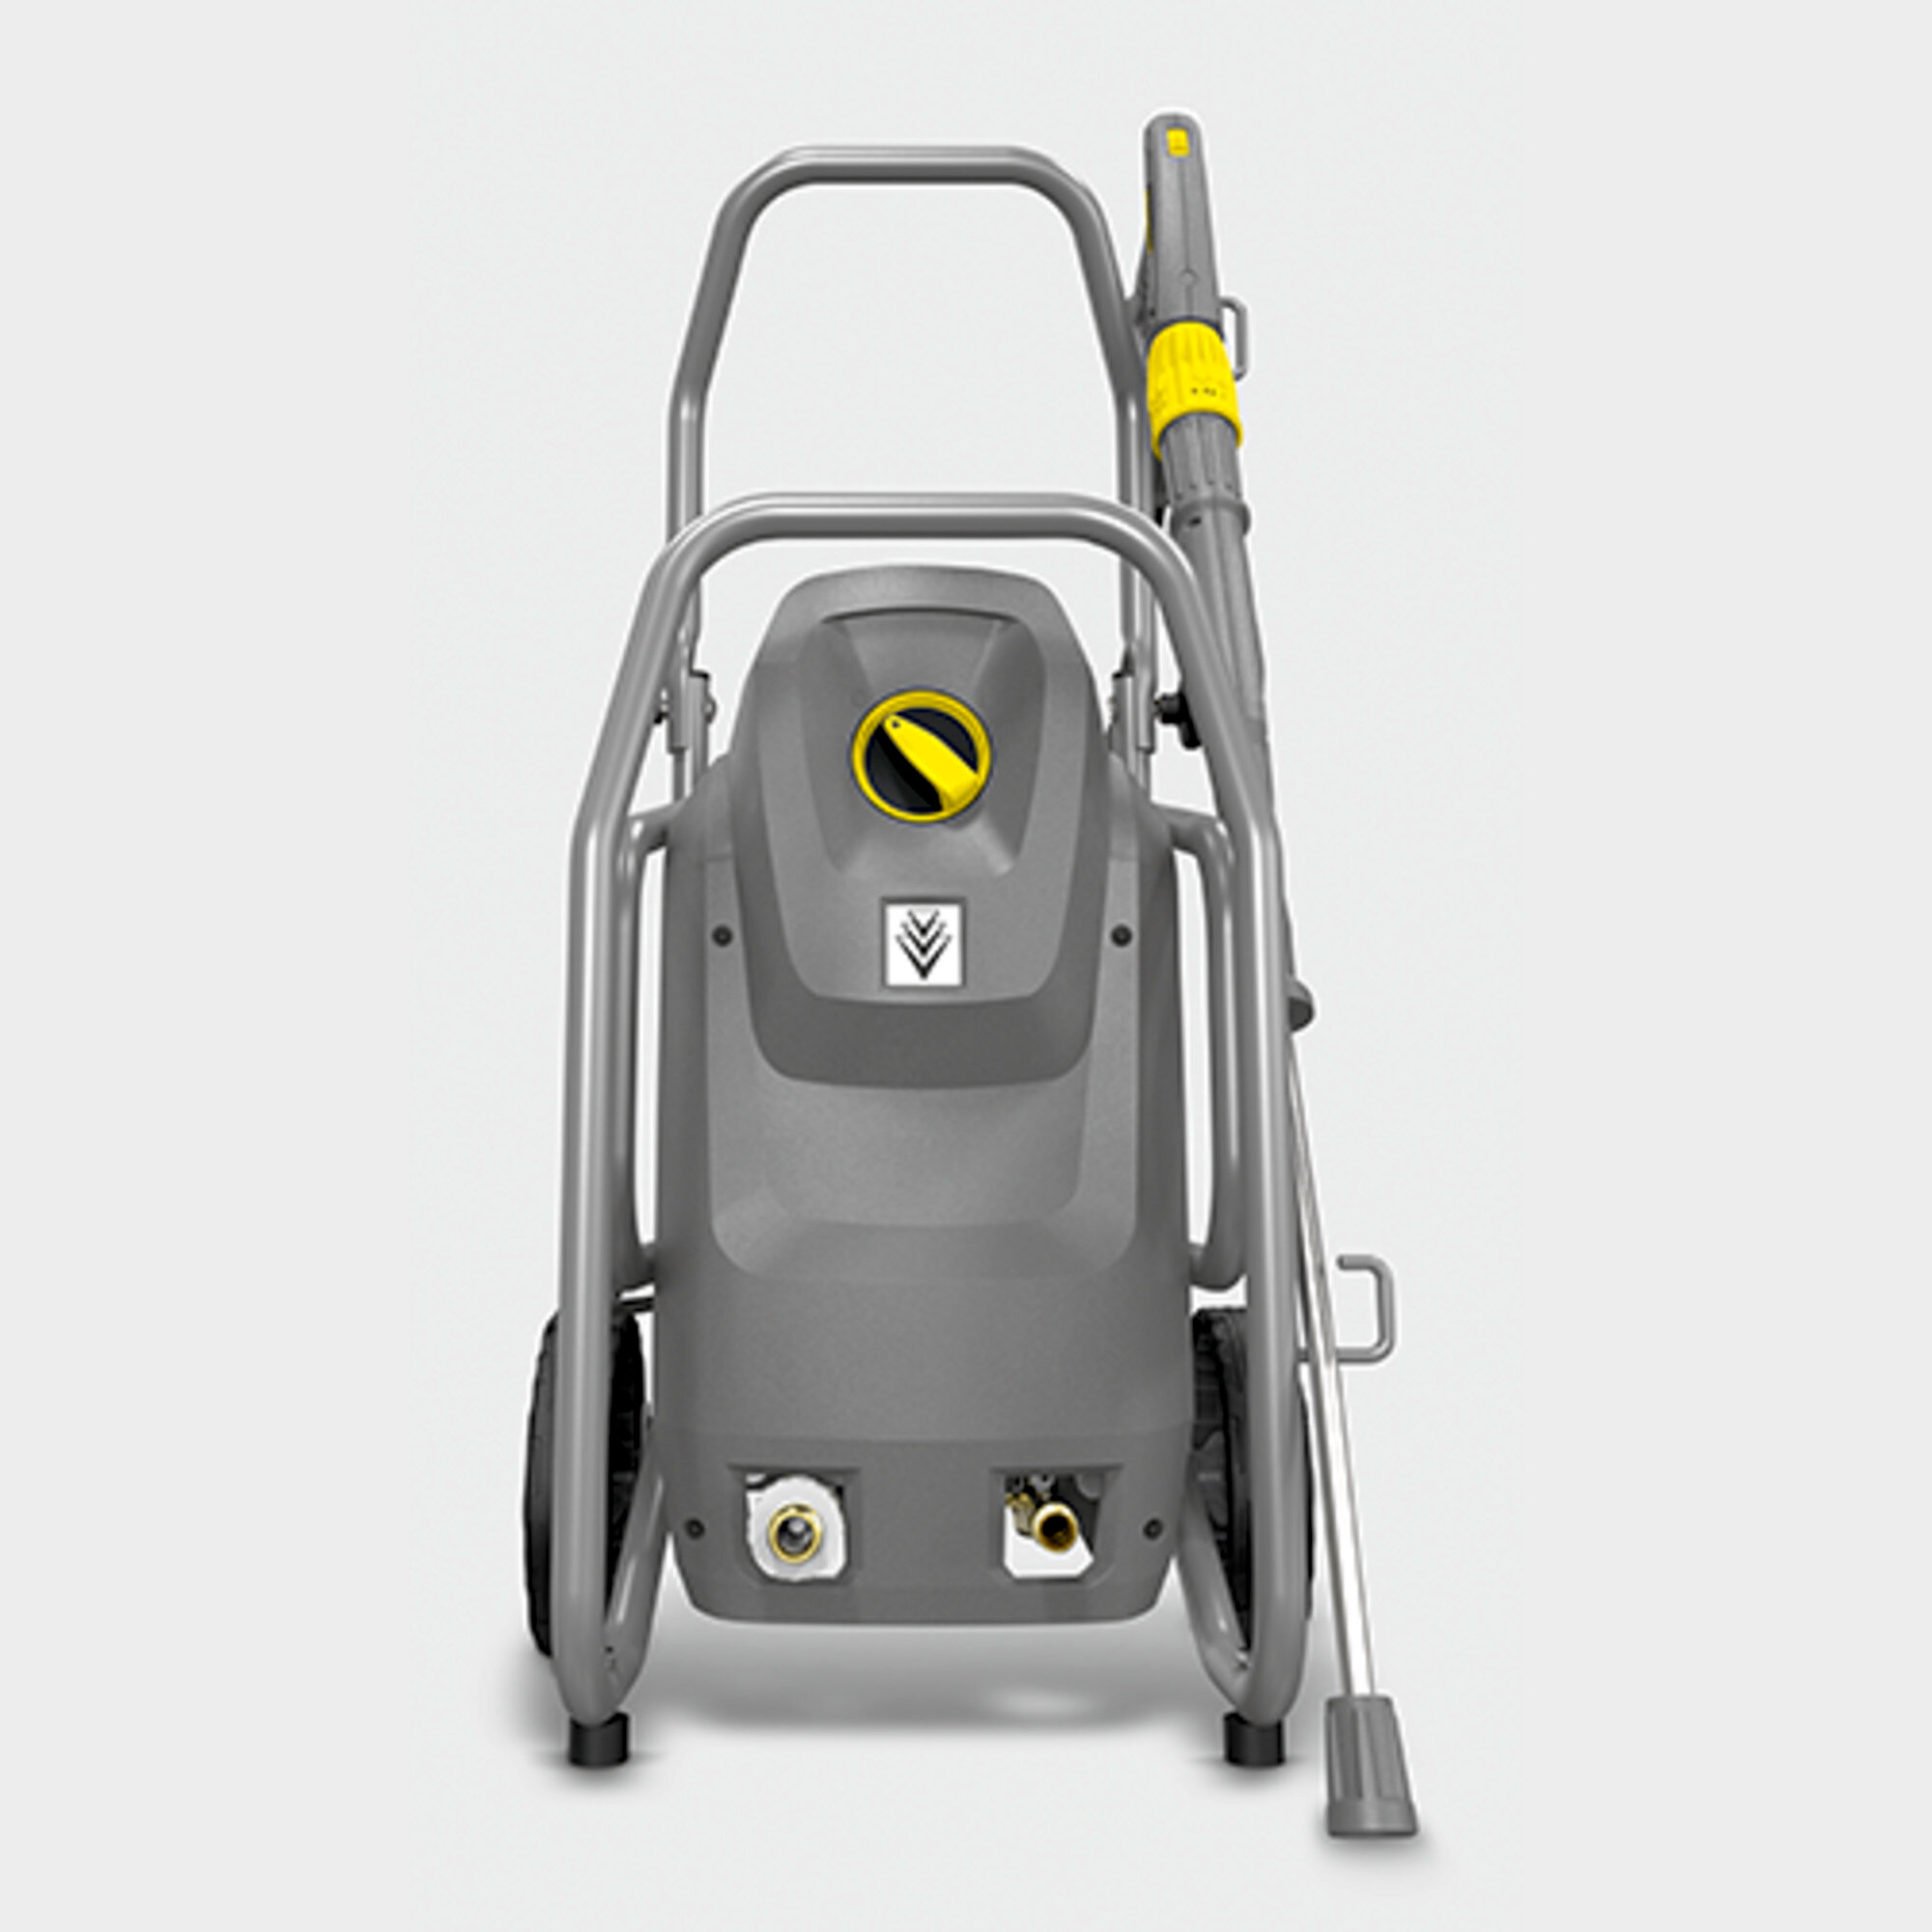 High pressure washer HD 6/15 M Cage: Easy servicing